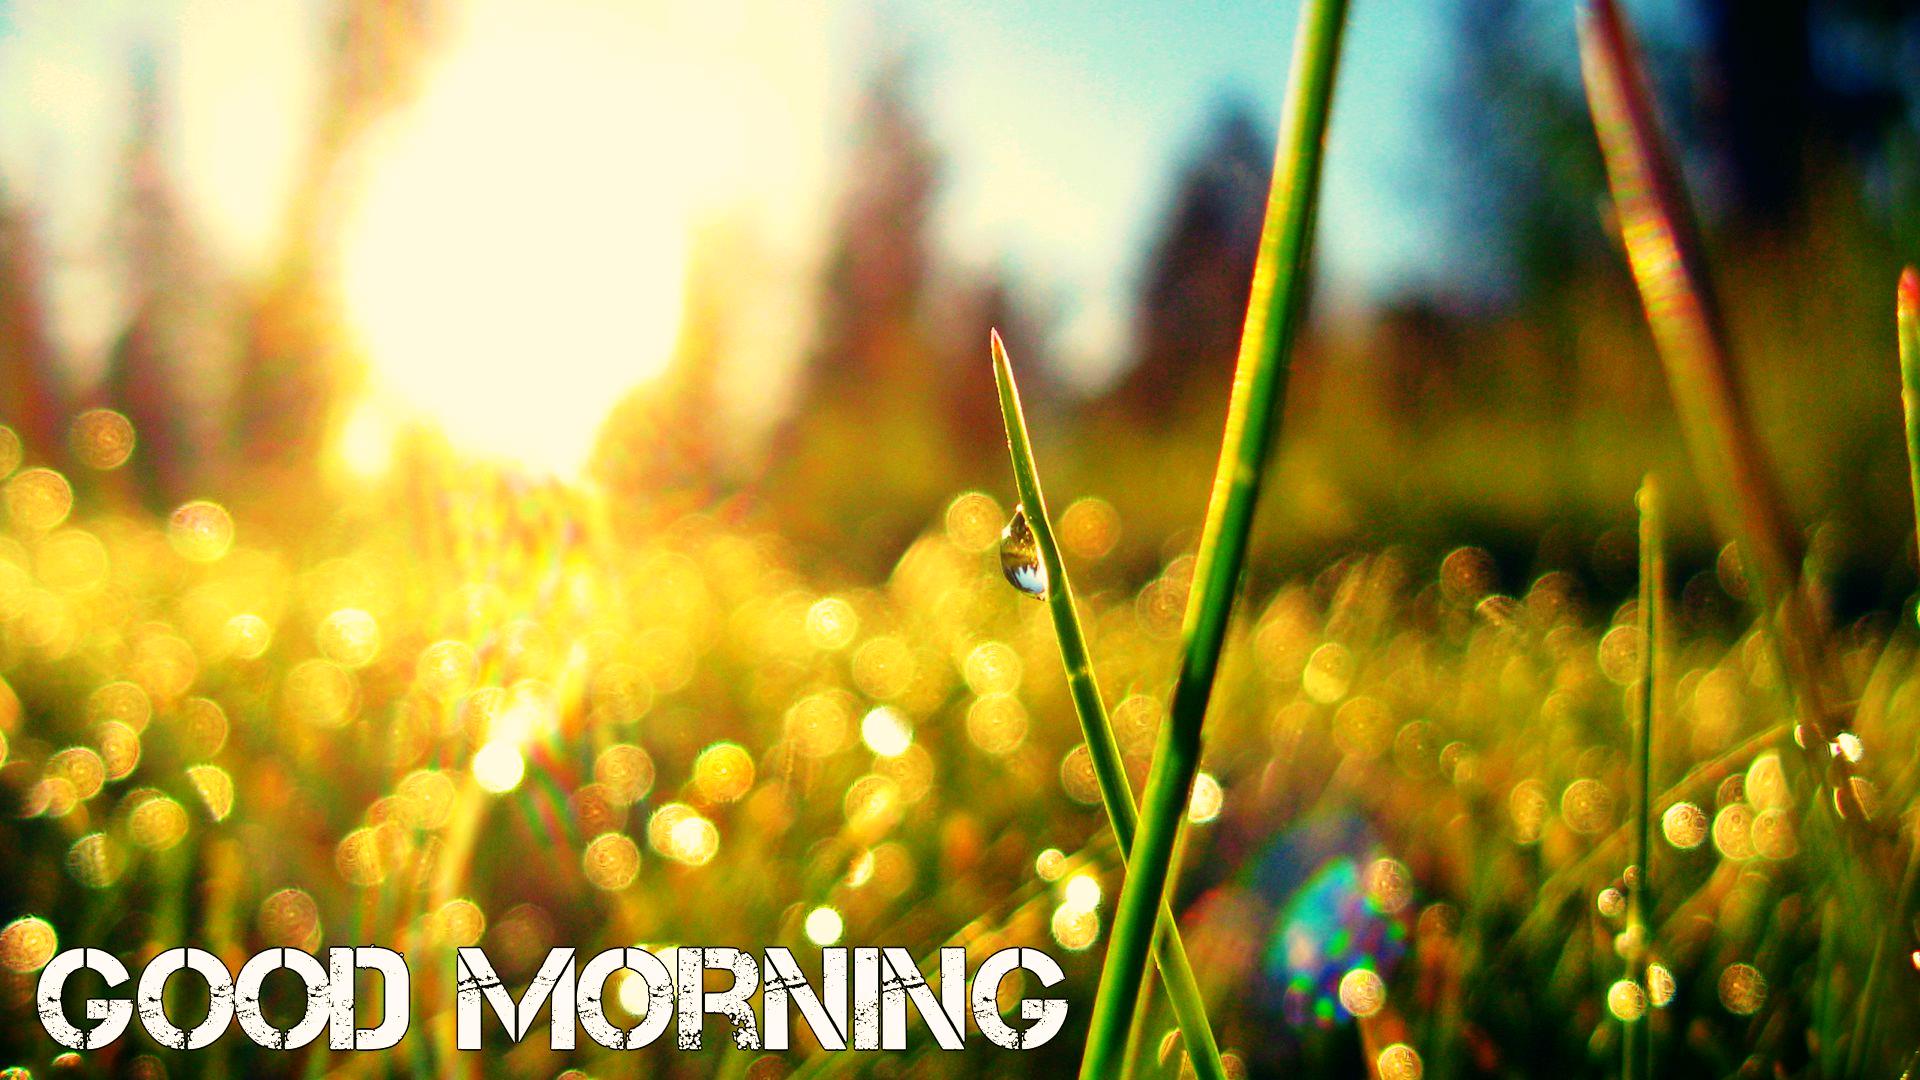 Good Morning Hd Wallpapers Free Background